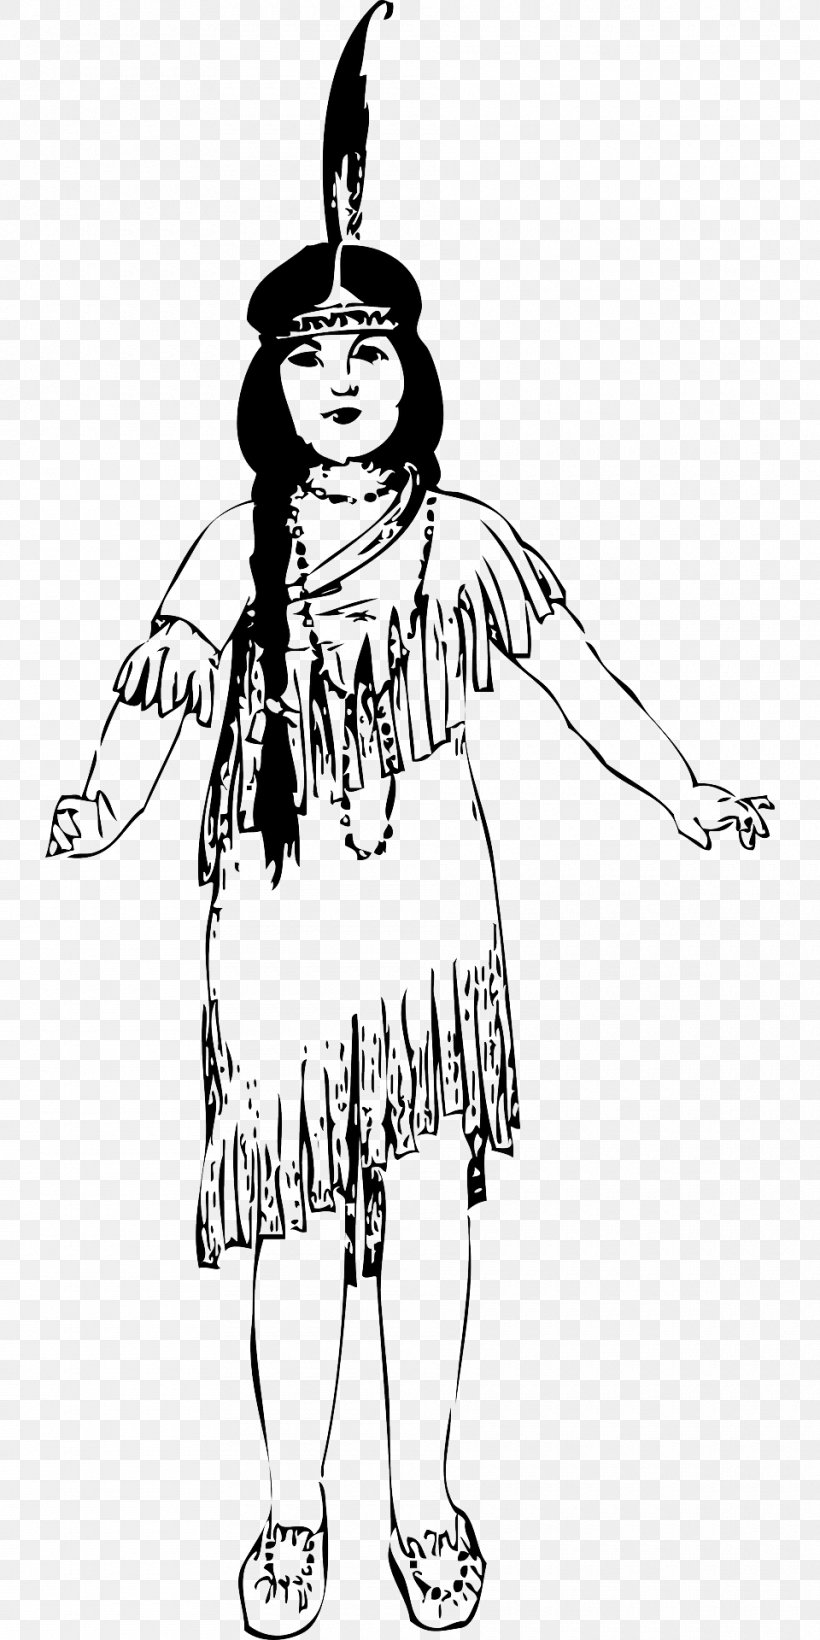 Native Americans In The United States Clip Art, PNG, 960x1920px, Americans, Art, Artwork, Black, Black And White Download Free